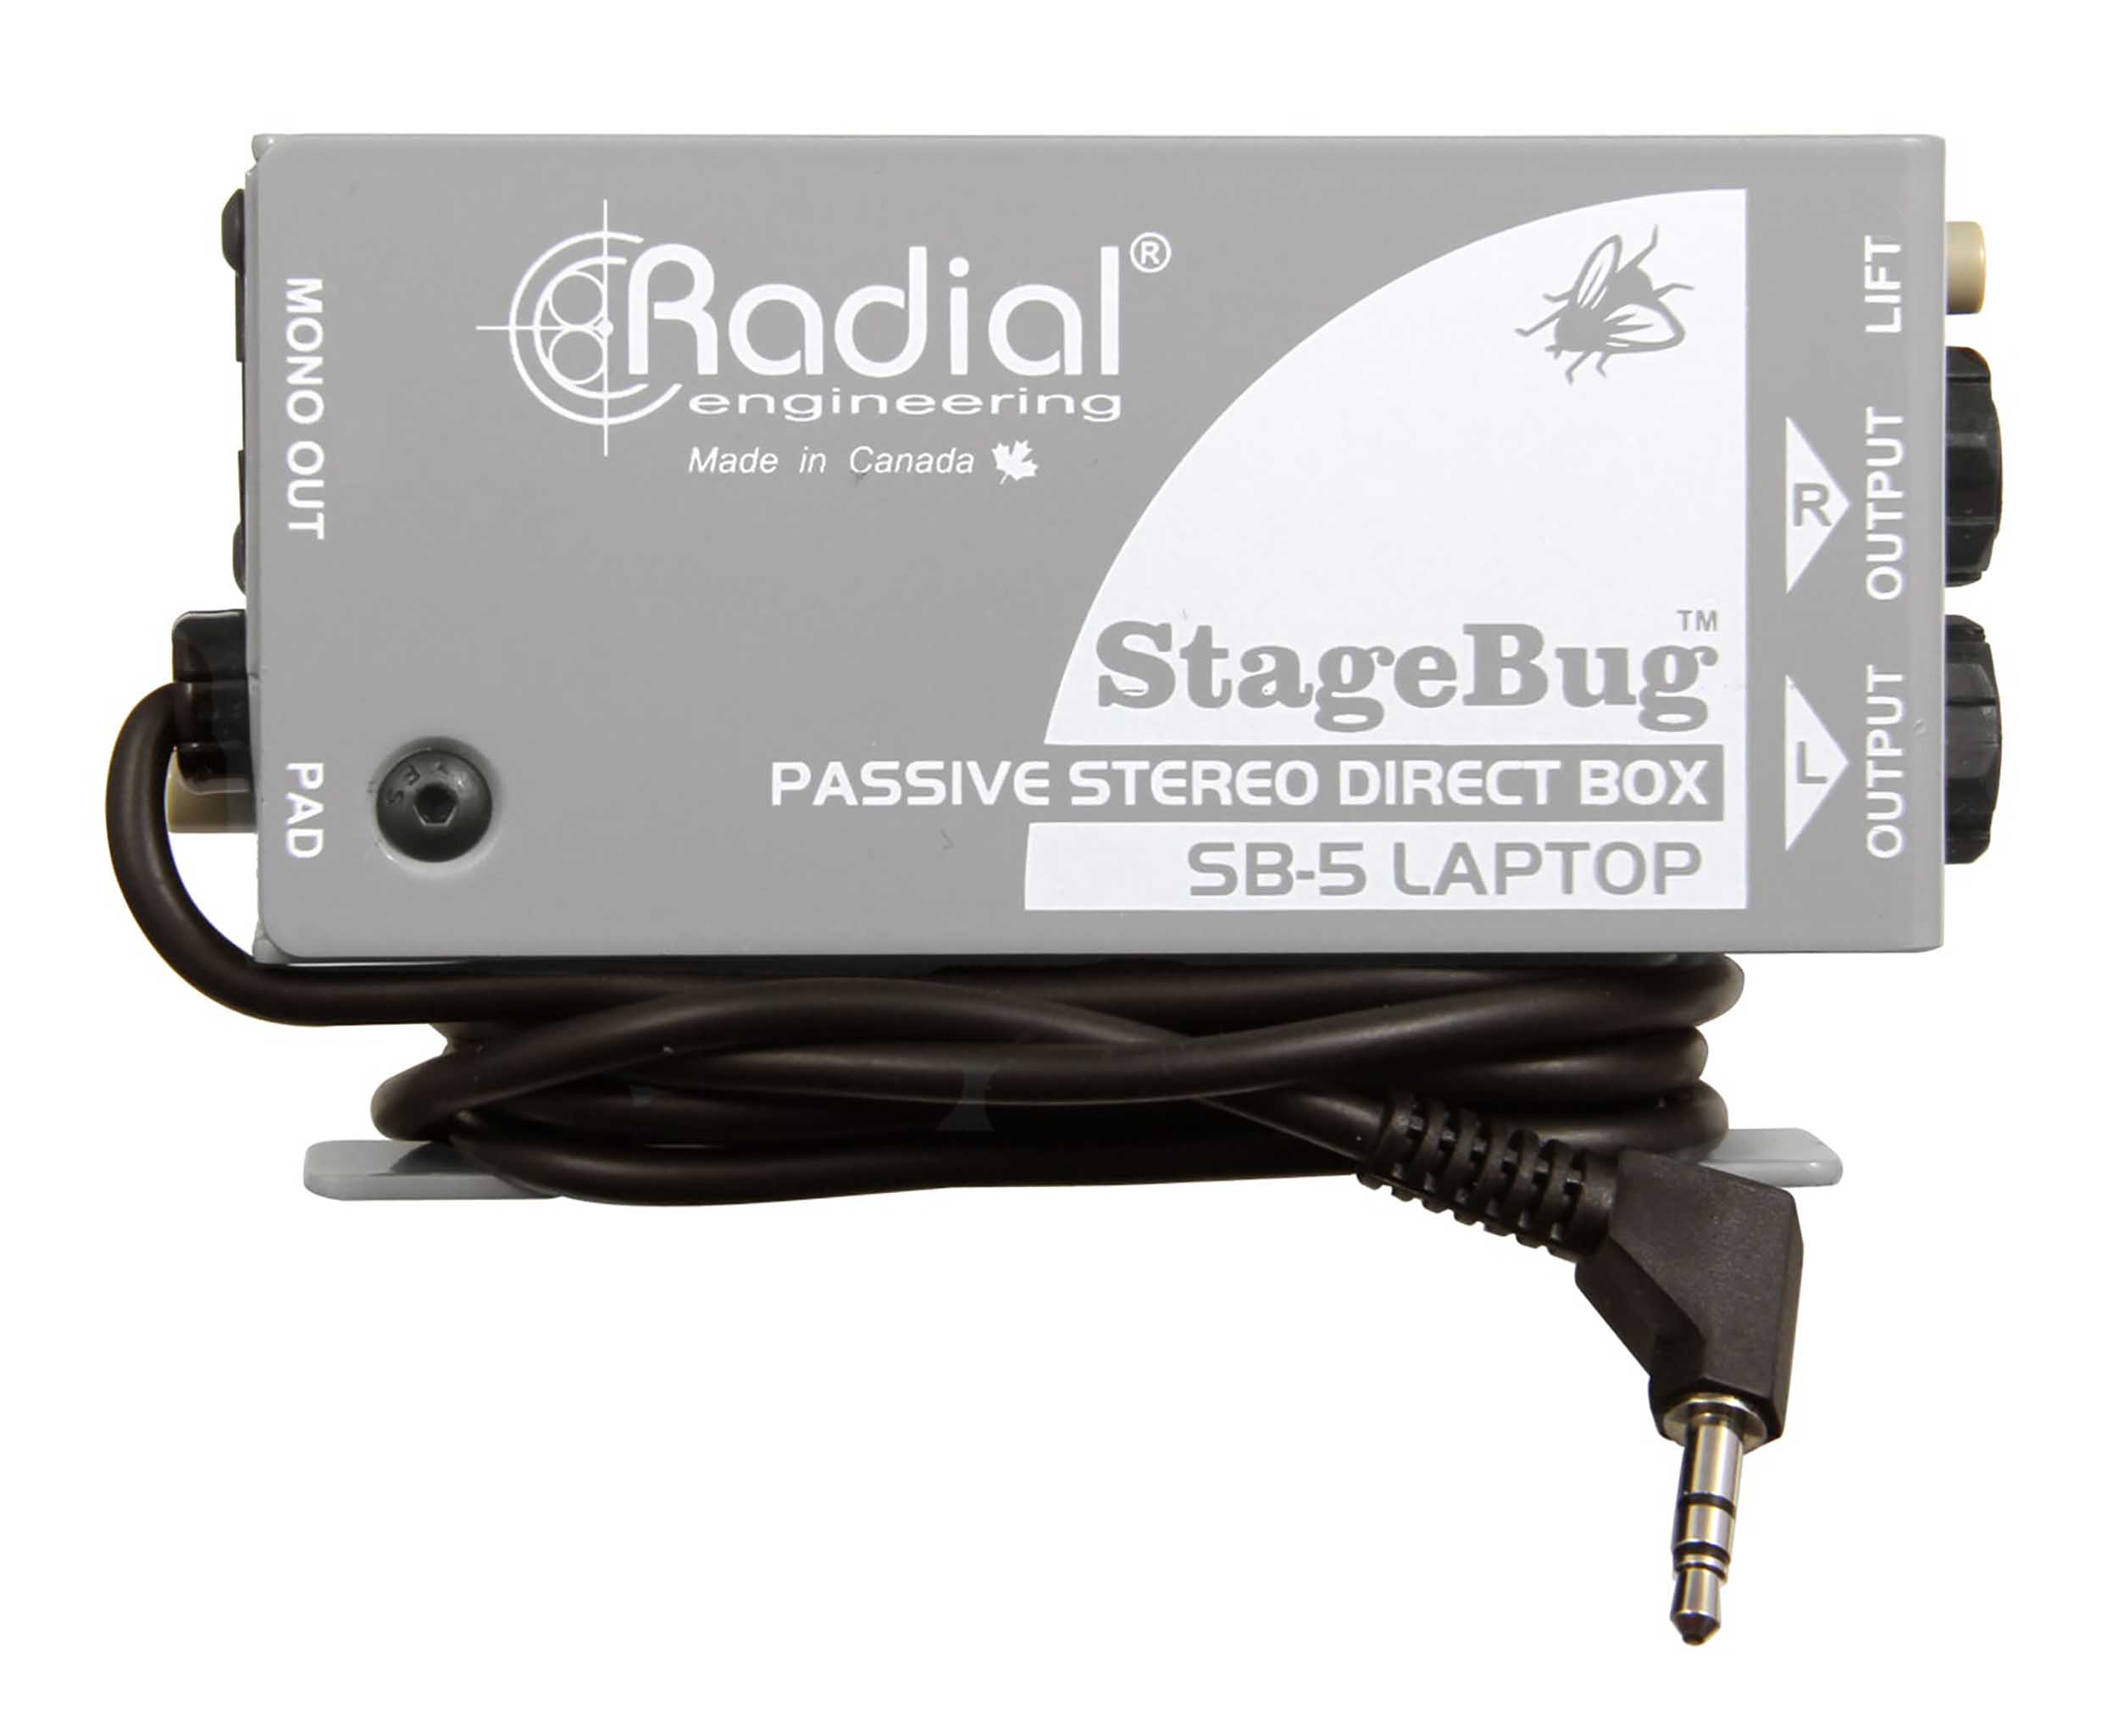 Radial Engineering StageBug SB-5 Compact Stereo Laptop Direct Box by Radial Engineering